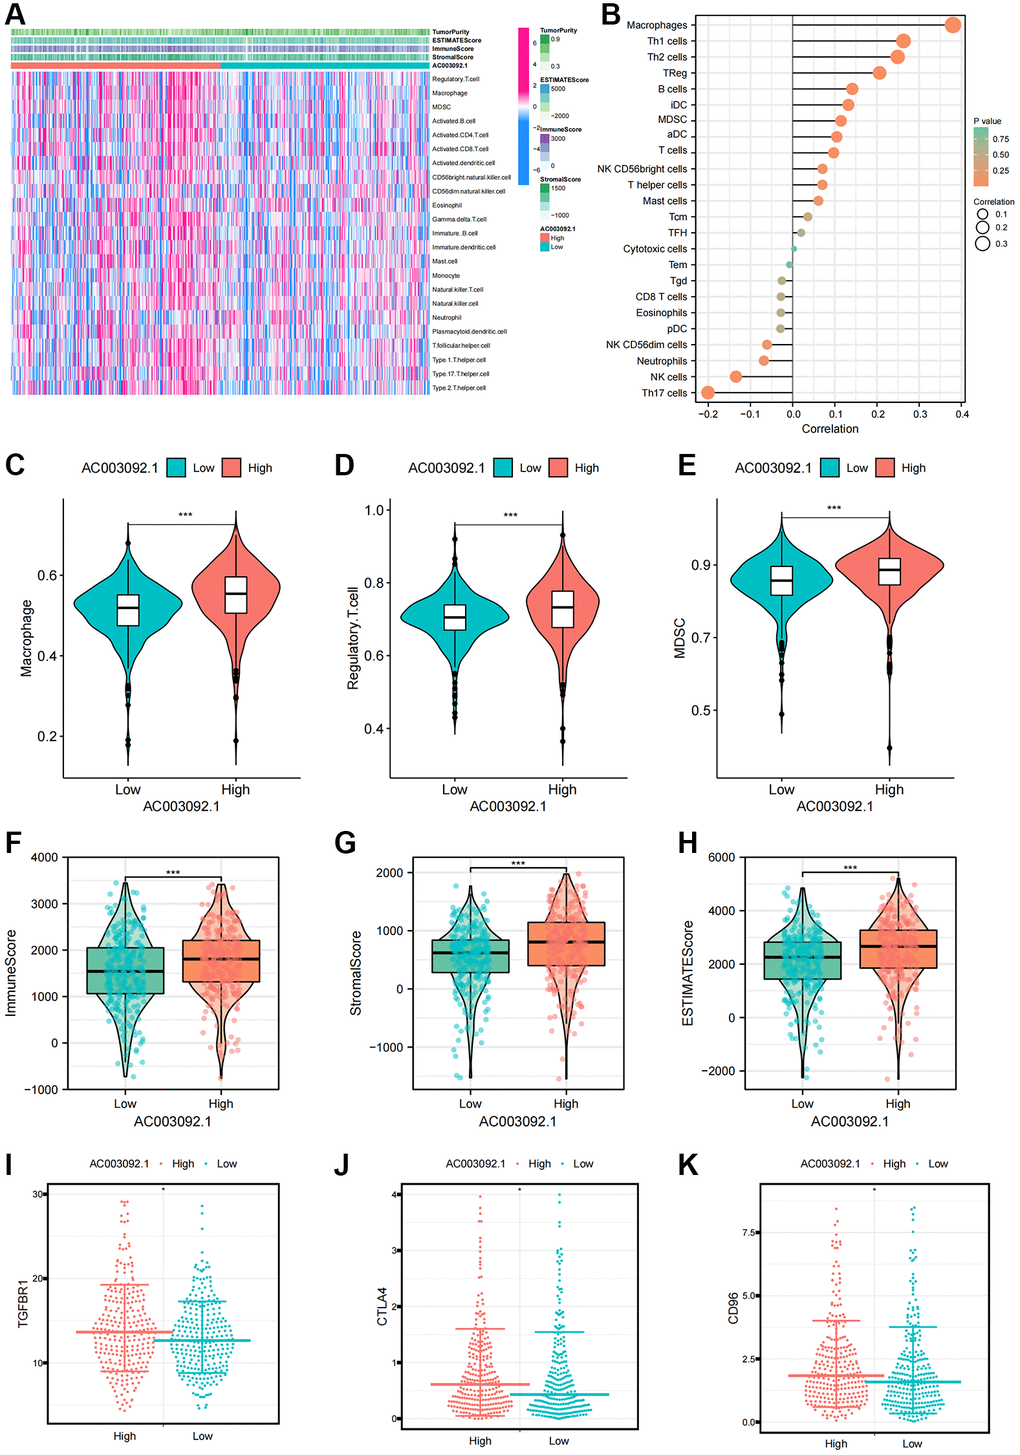 Immune characteristics of AC003092.1 in ccRCC. (A) Distribution of immune infiltrating cells and tumor microenvironment scores in high and low AC003092.1 expression groups; (B) Correlation between immunoinfiltrating cells and AC003092.1 expression profiles. (C–E) Differences in immunosuppressive cell expression between high and low AC003092.1 groups (C: Macrophage; D: Regulatory.T.cell; E: MDSC); (F–H) Differences in tumor microenvironment scores between high and low AC003092.1 groups (F: ImmuneScore; G: StromalScore; H: ESTIMATEScore); (I–K) Differences in immune suppression checkpoints between high and low AC003092.1 groups (I: TGFBR1; J: CTLA4; K: CD96).